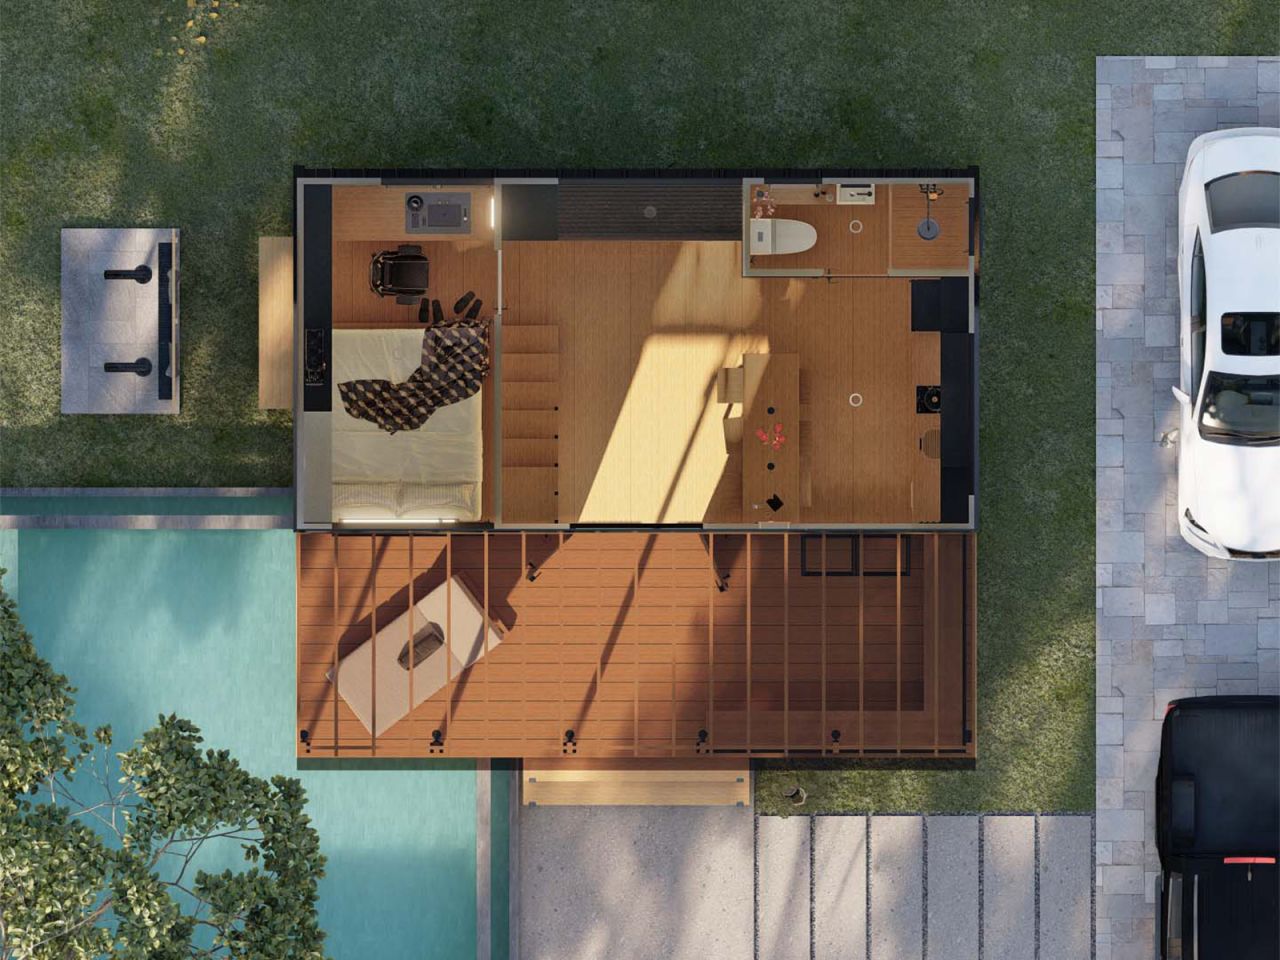 Cubo's homes range from 30 to 63 square meters, the largest sleeping up to six people.